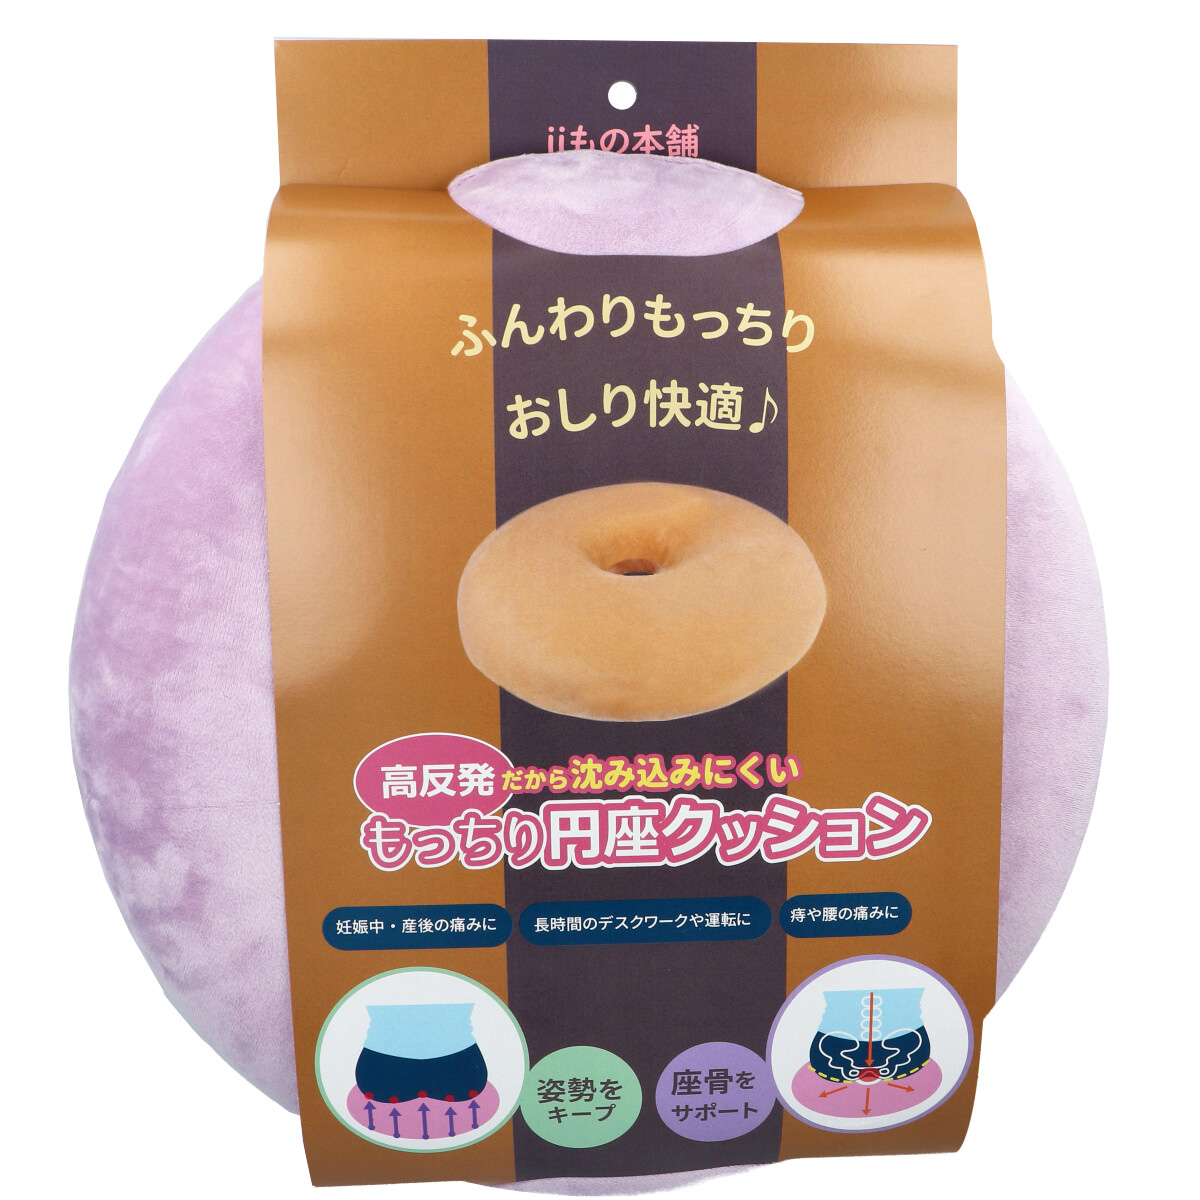 Picture of Purple color High Resilience Donut Cushion